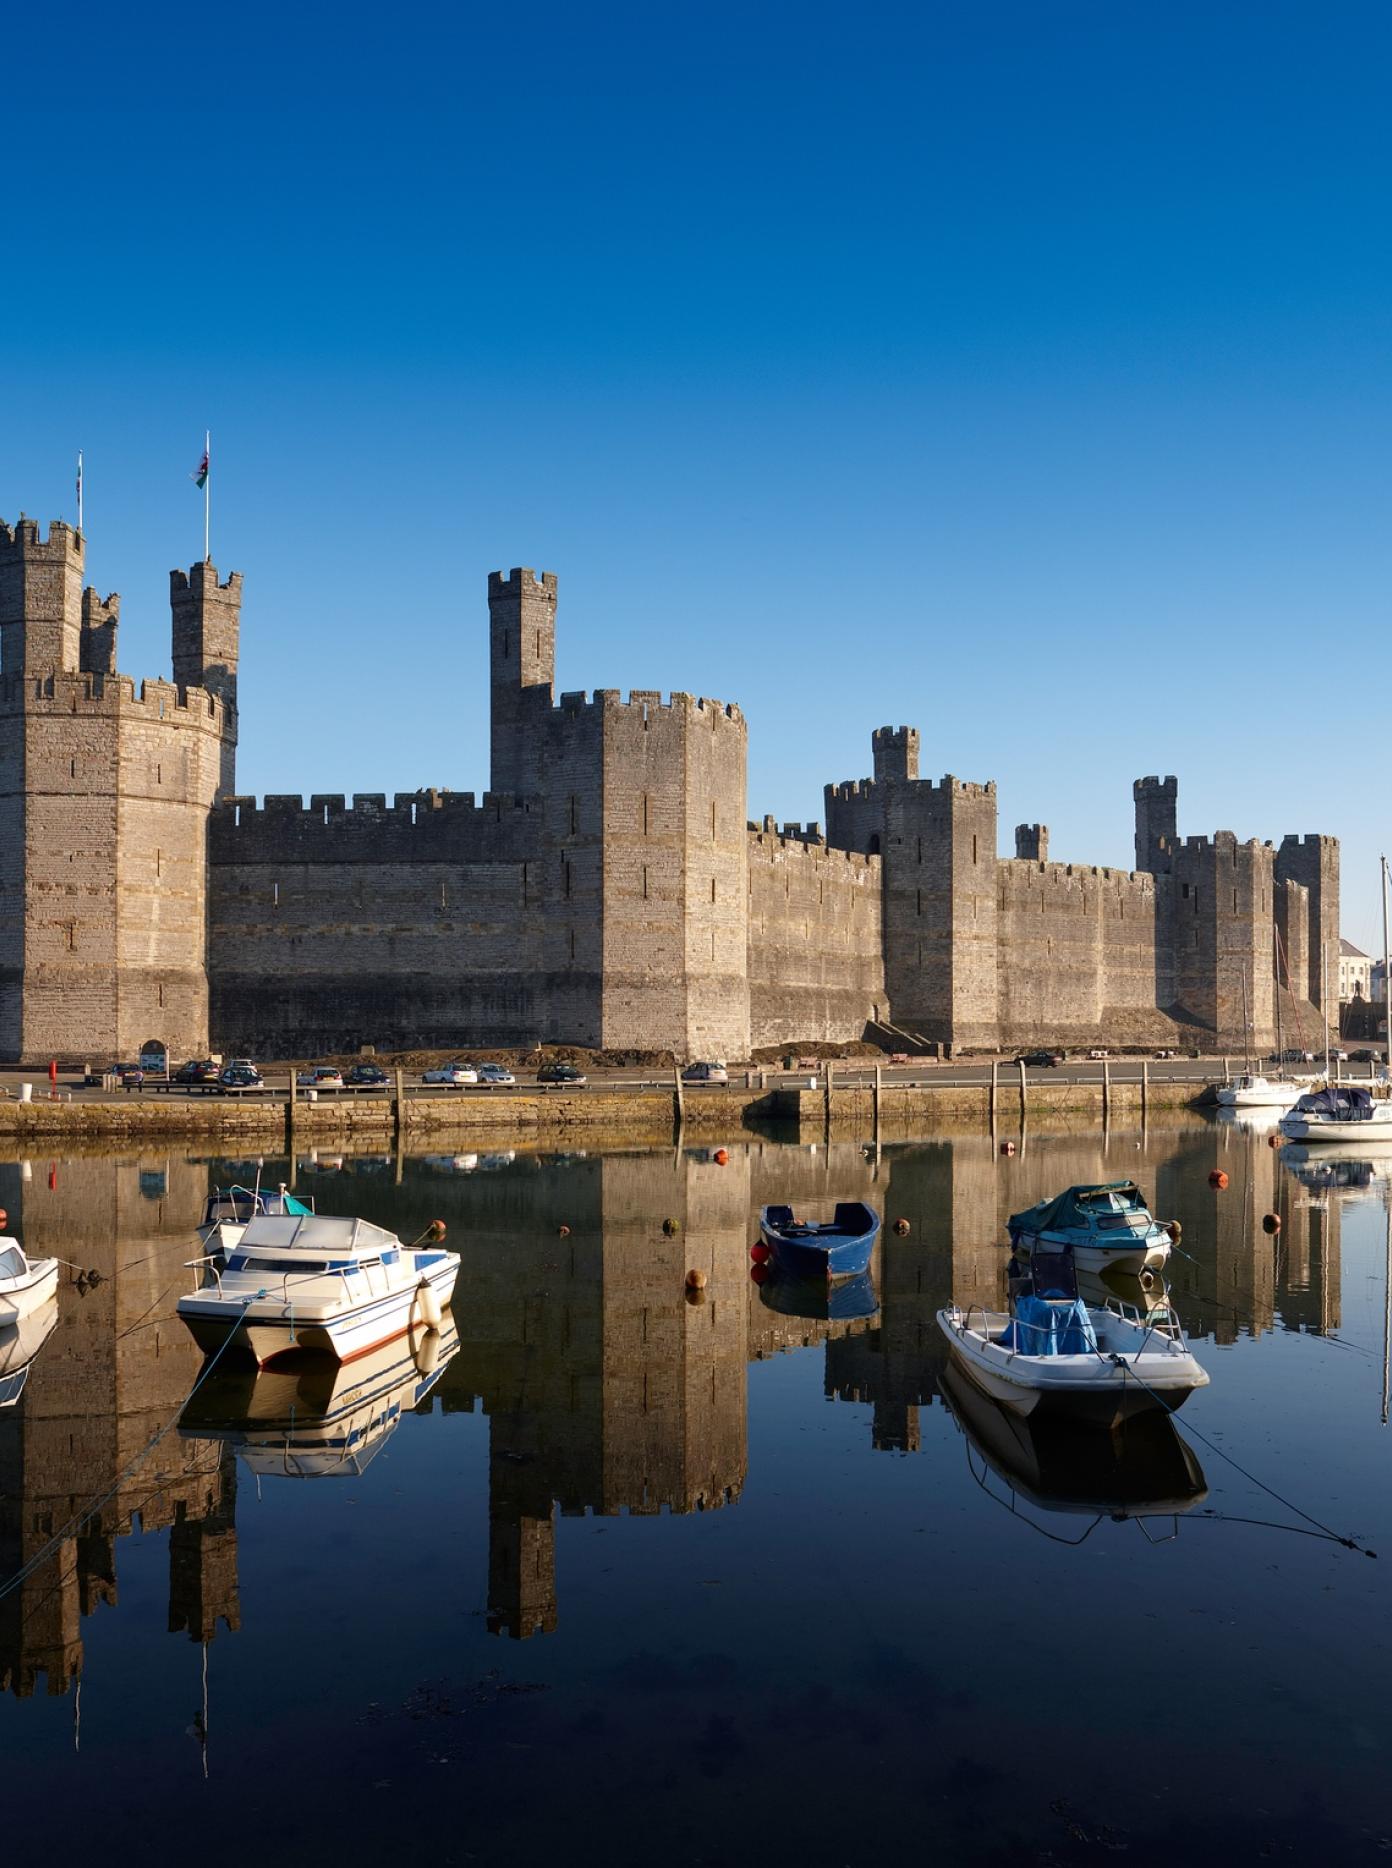 castles to visit wales